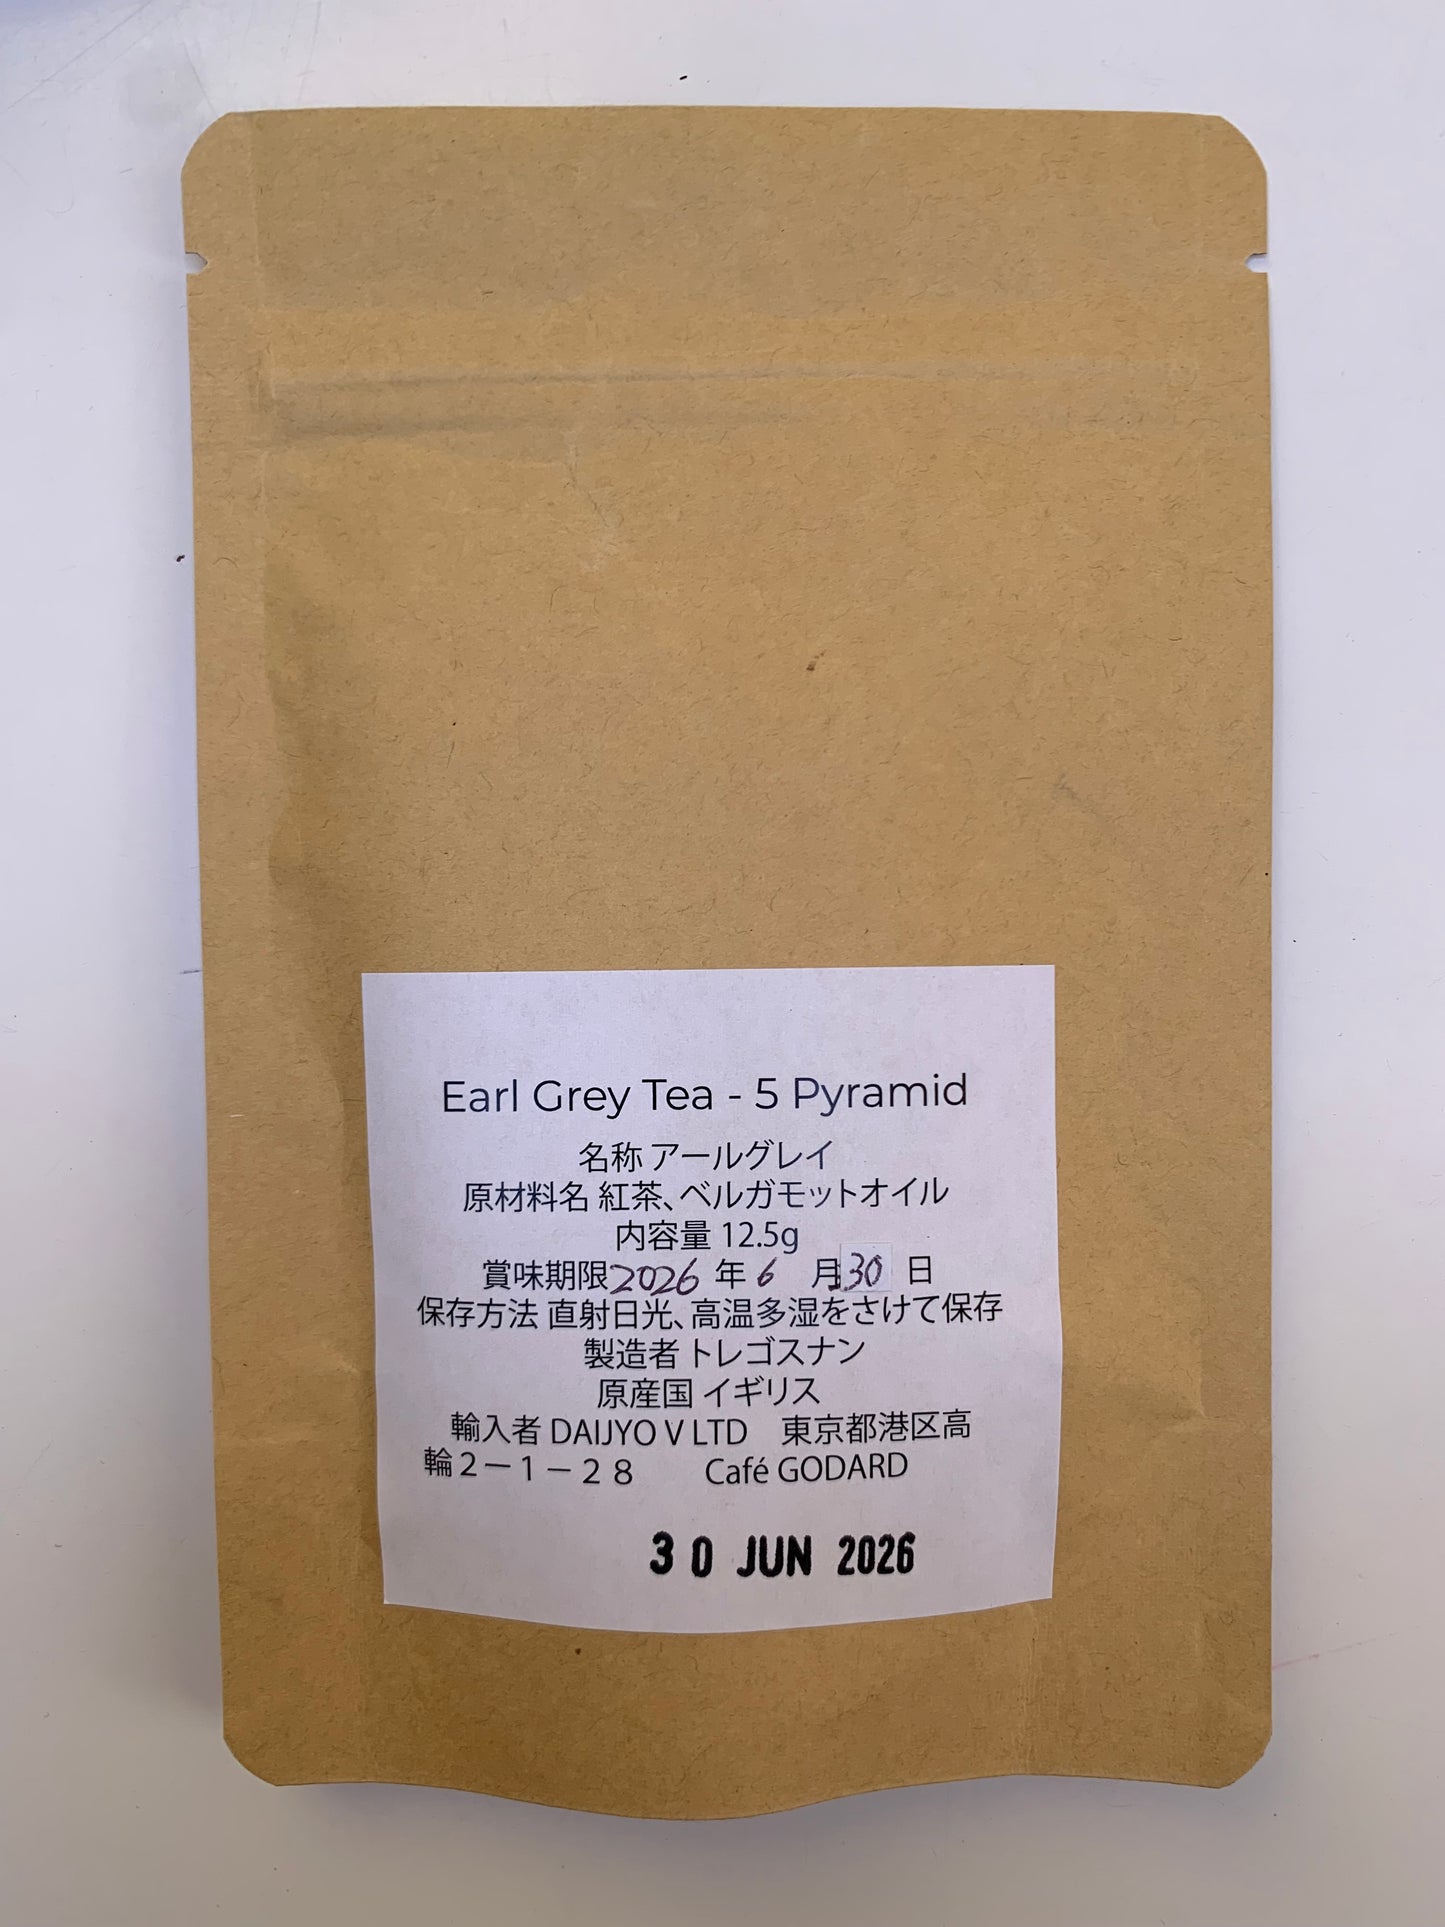 back image of a tea pouch with ingredients written in Japanese